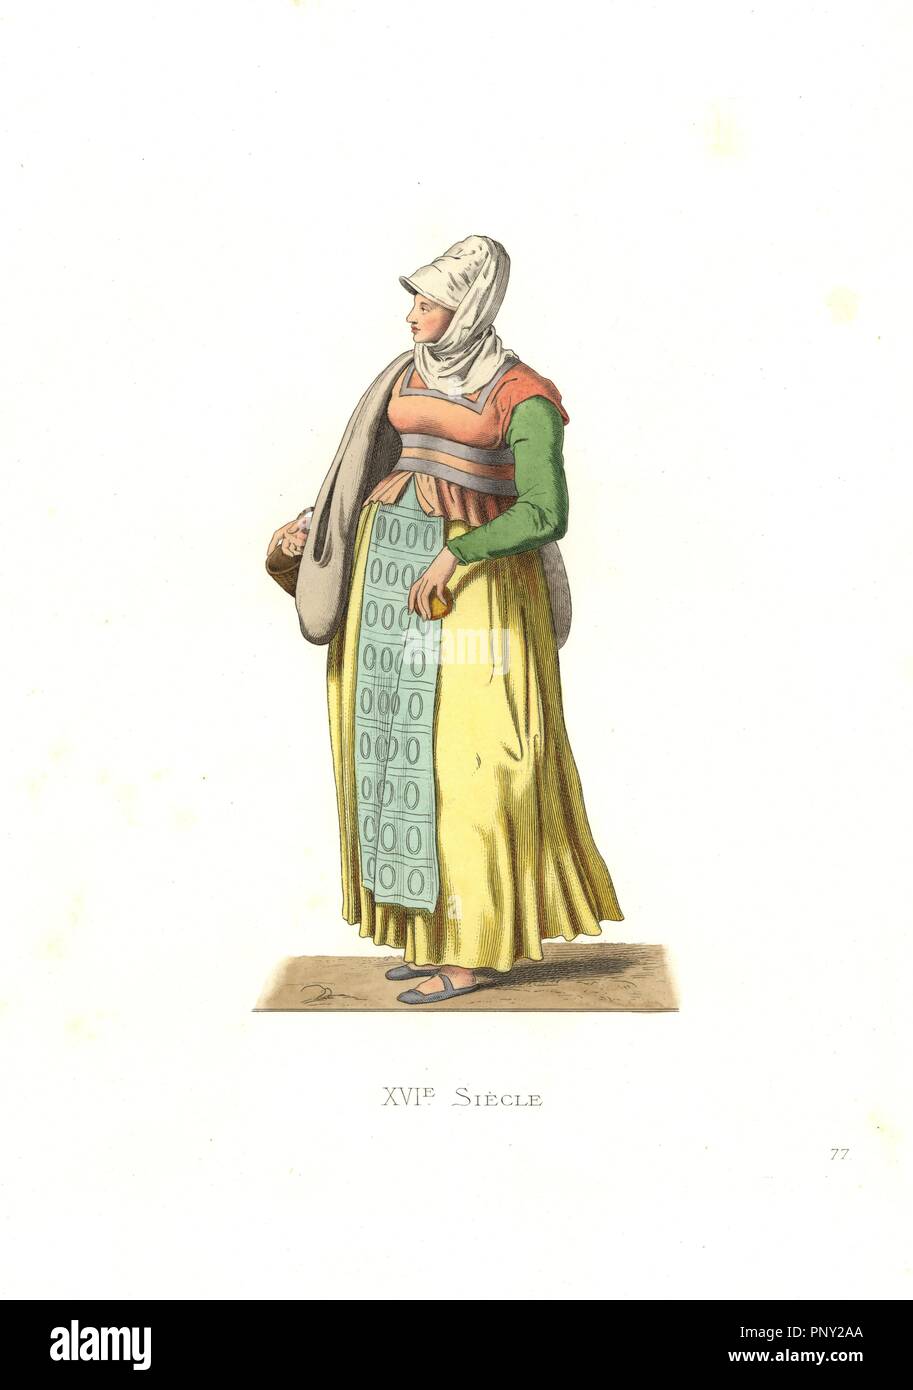 Peasant woman of Portugal, 16th century, based on a contemporary print. Handcolored illustration by E. Lechevallier-Chevignard, lithographed by A. Didier, L. Flameng, F. Laguillermie, from Georges Duplessis's 'Costumes historiques des XVIe, XVIIe et XVIIIe siecles' (Historical costumes of the 16th, 17th and 18th centuries), Paris 1867. The book was a continuation of the series on the costumes of the 12th to 15th centuries published by Camille Bonnard and Paul Mercuri from 1830. Georges Duplessis (1834-1899) was curator of the Prints department at the Bibliotheque nationale. Edmond Lechevallier Stock Photo